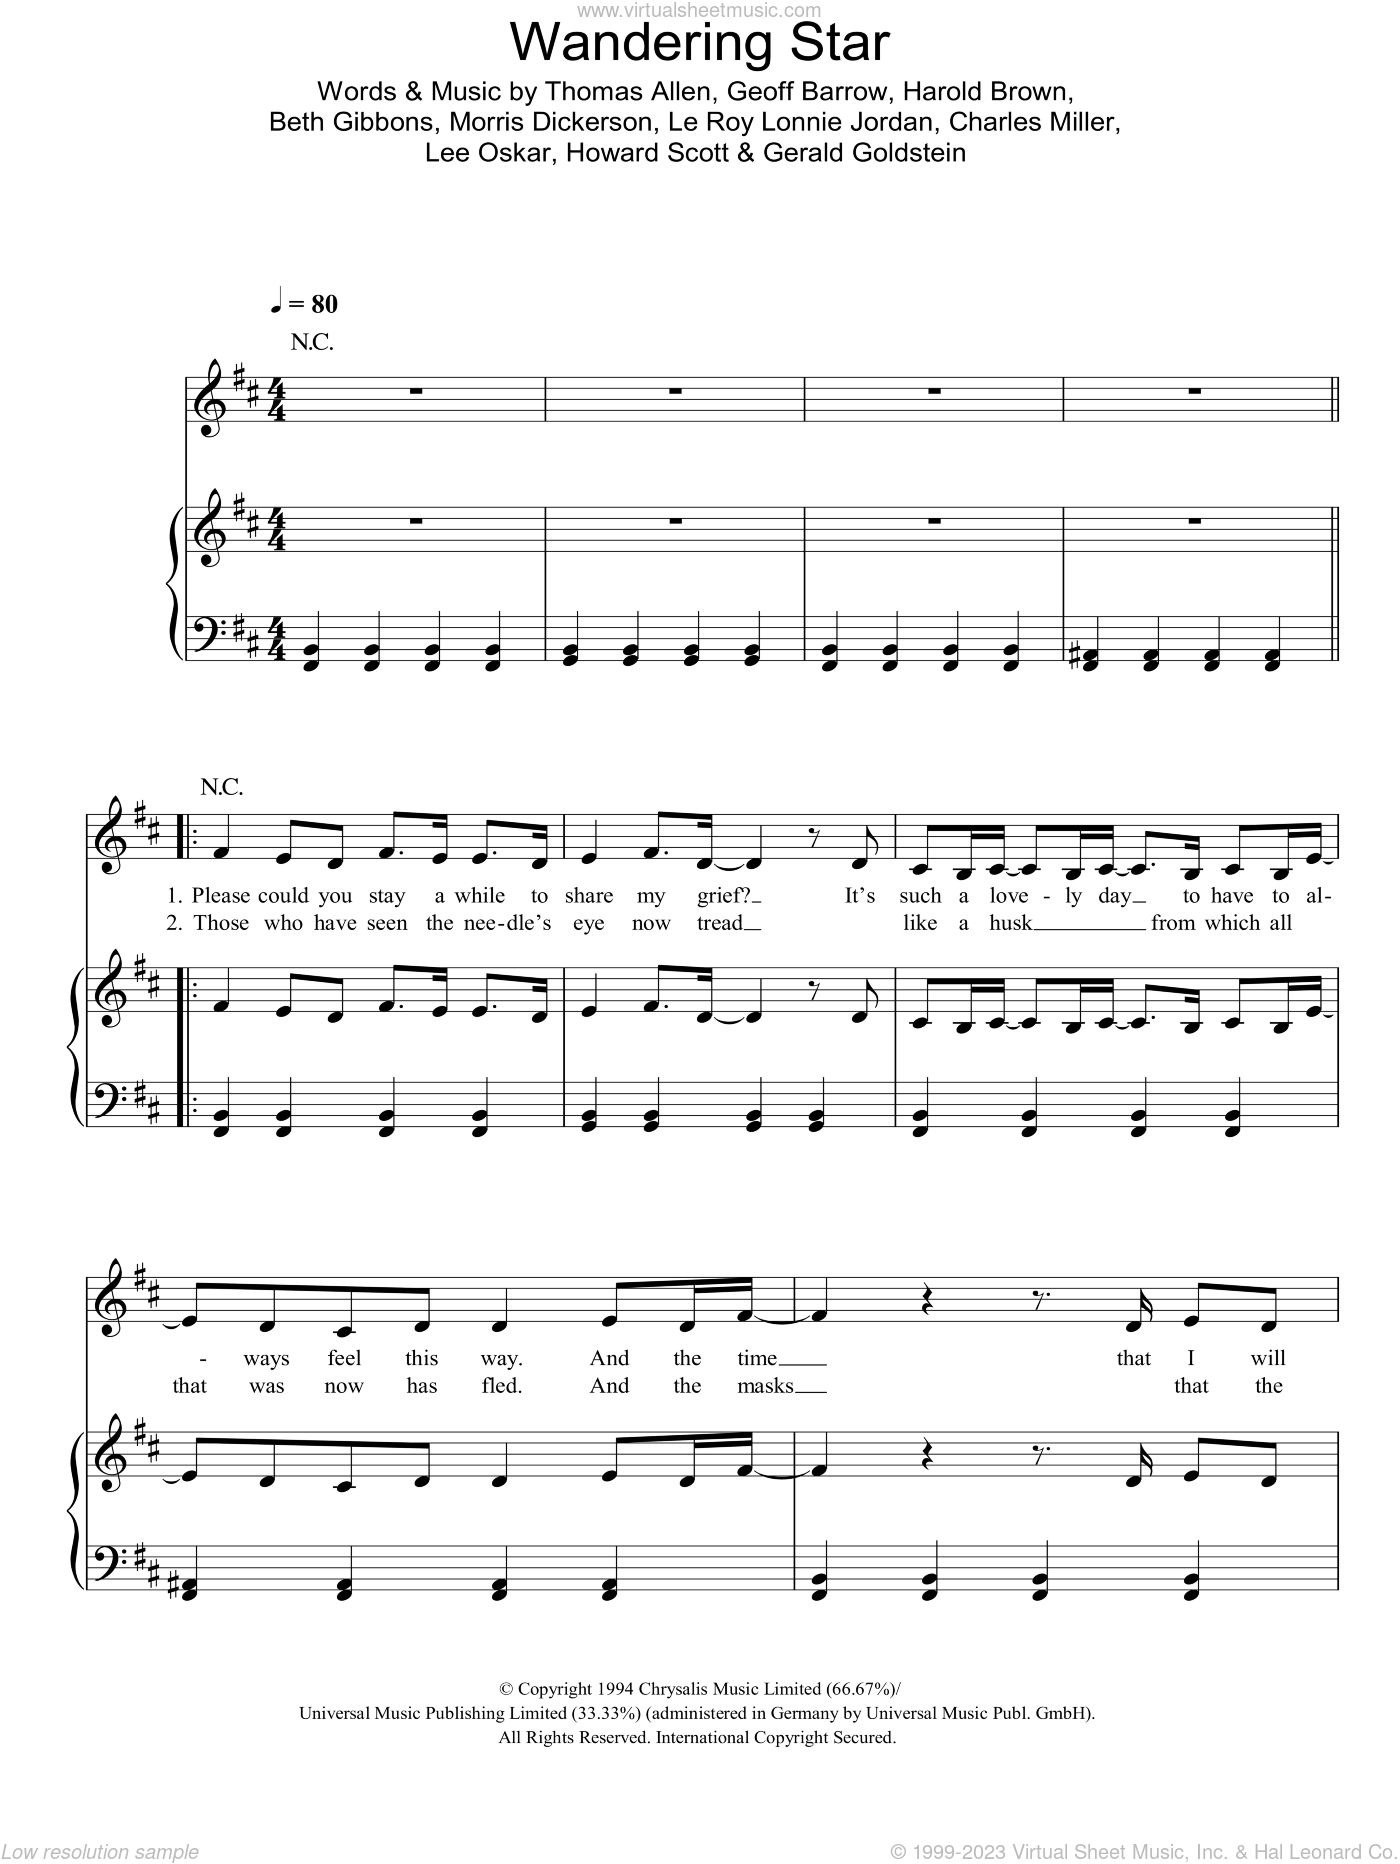 I Was Born Under A Wandering Star Chords Portishead - Wandering Star sheet music for voice, piano or guitar